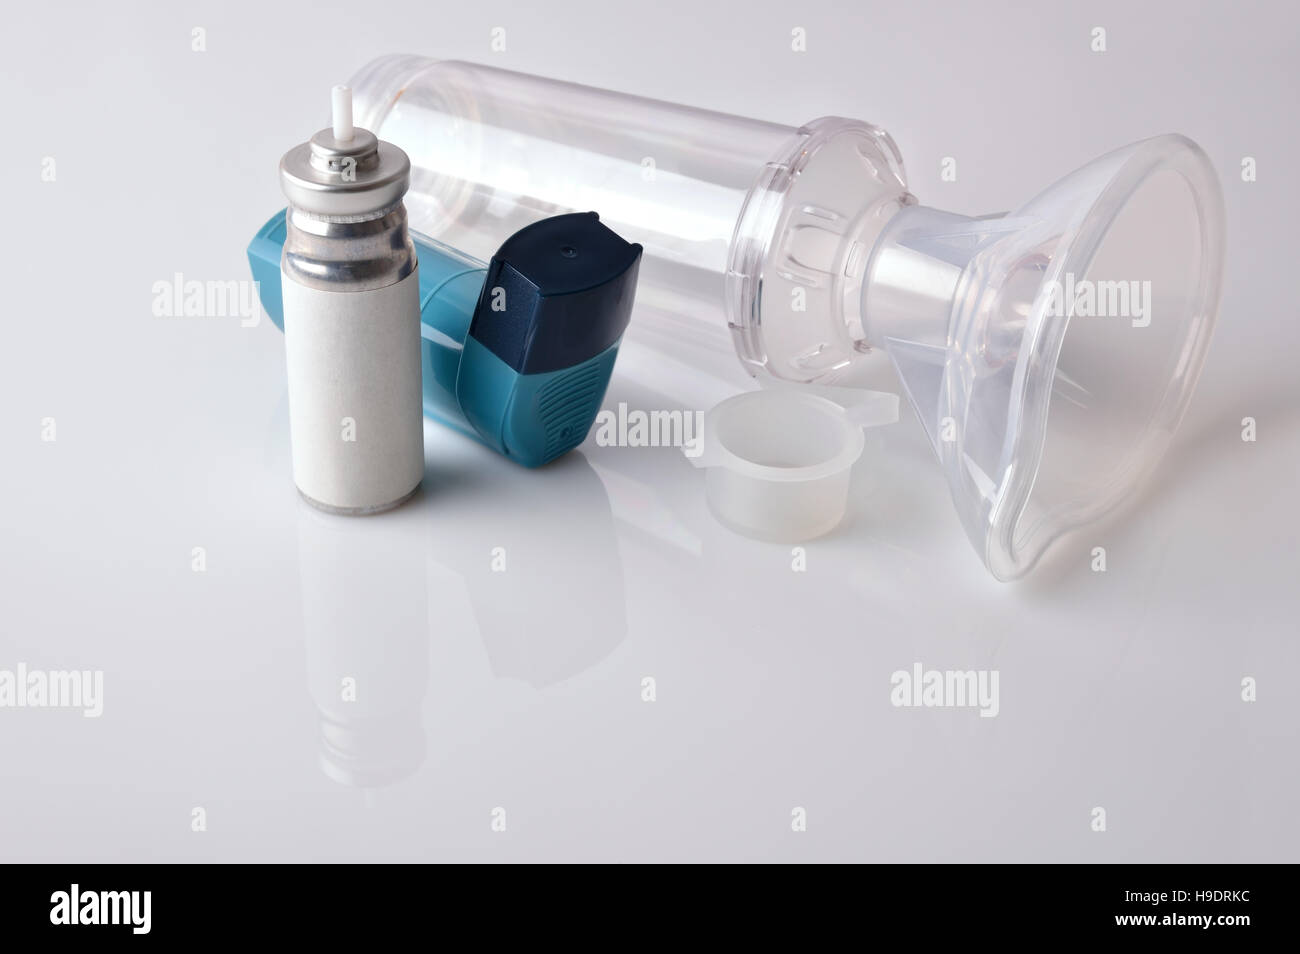 Cartridge, blue medicine inhaler, inhalation chamber and silicone mask isolated on white glass table. Elevated view. Horizontal composition Stock Photo